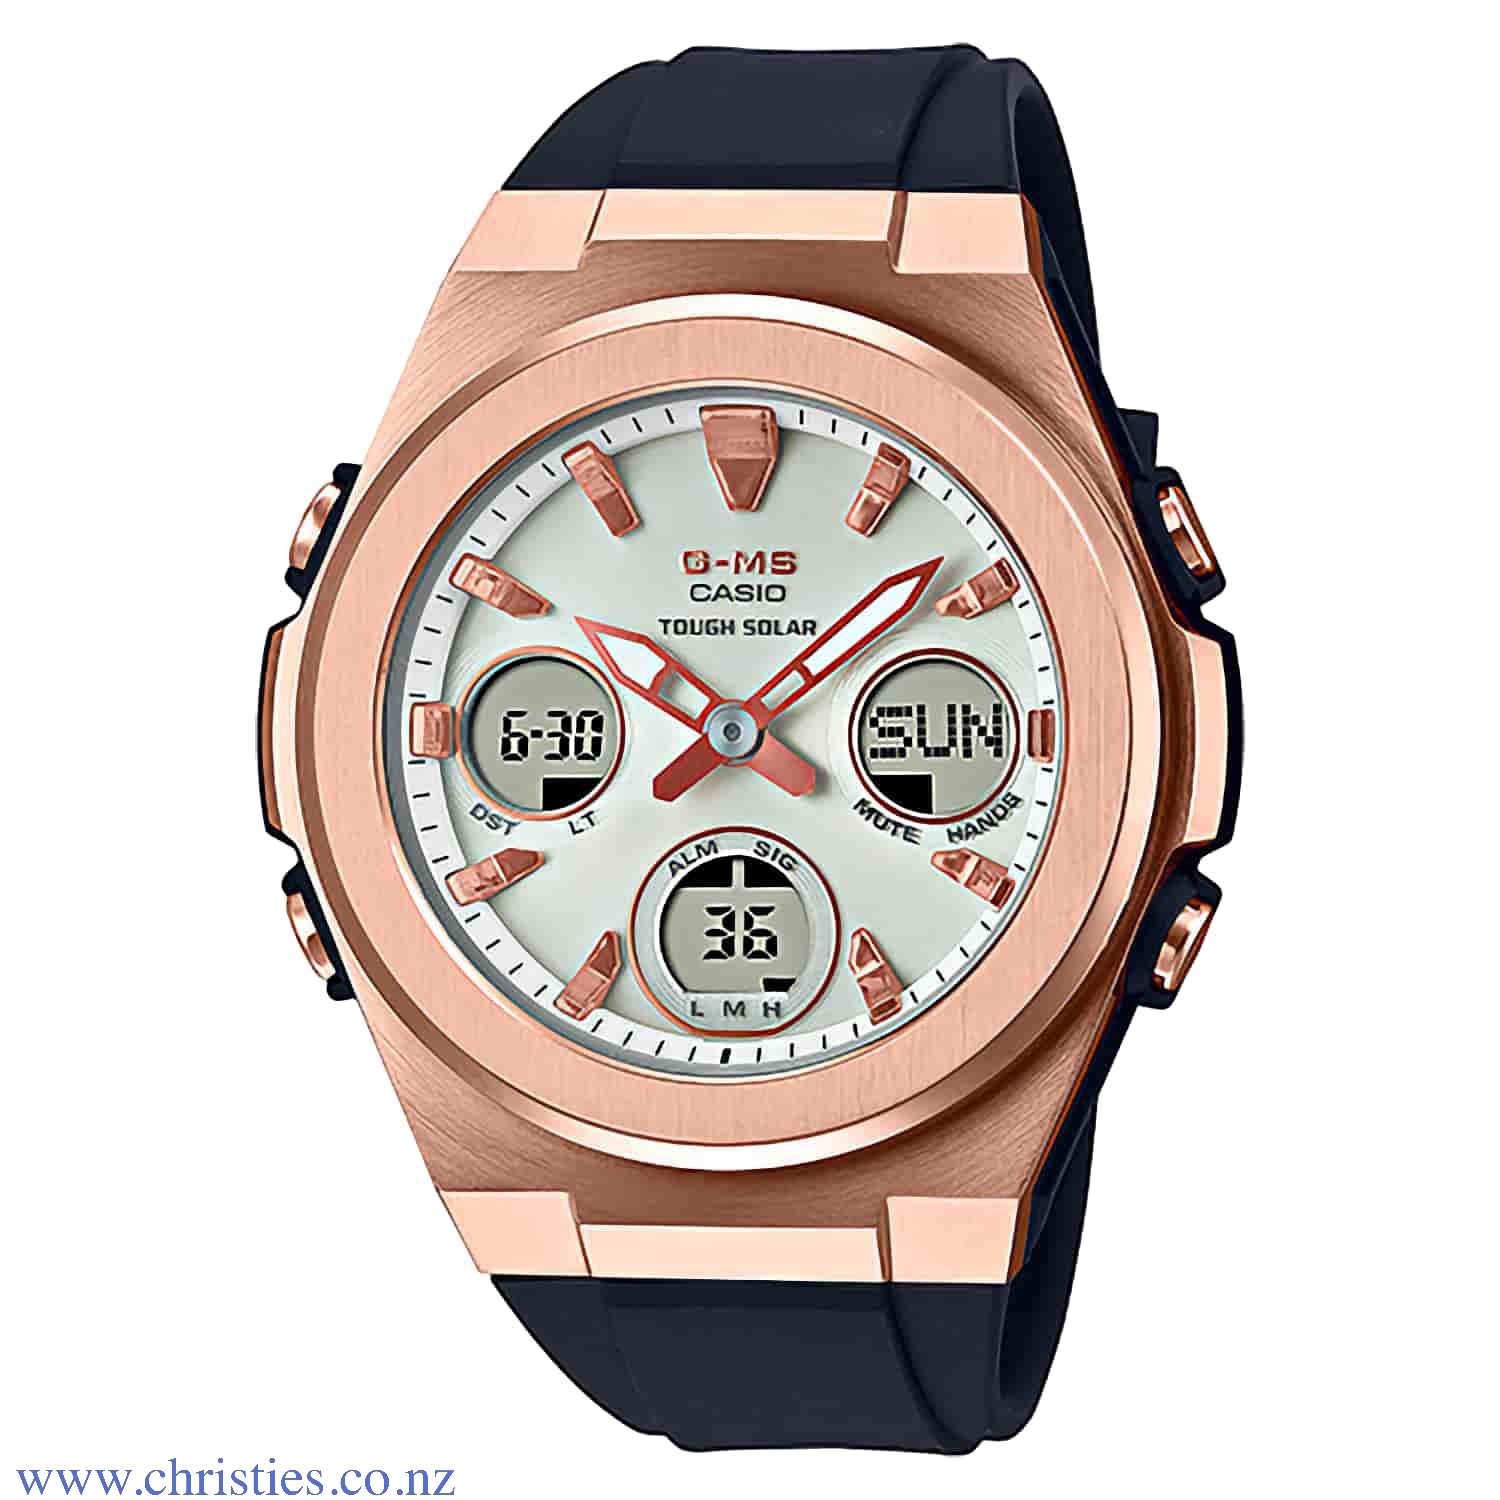 MSGS600G-1A Casio BabY-G G-MS Solar Rose Watches. The three digital displays of these models combine with analog timekeeping to create a sporty yet elegant look. These watches feature elegant metal cases and resin bands available in black or white for per